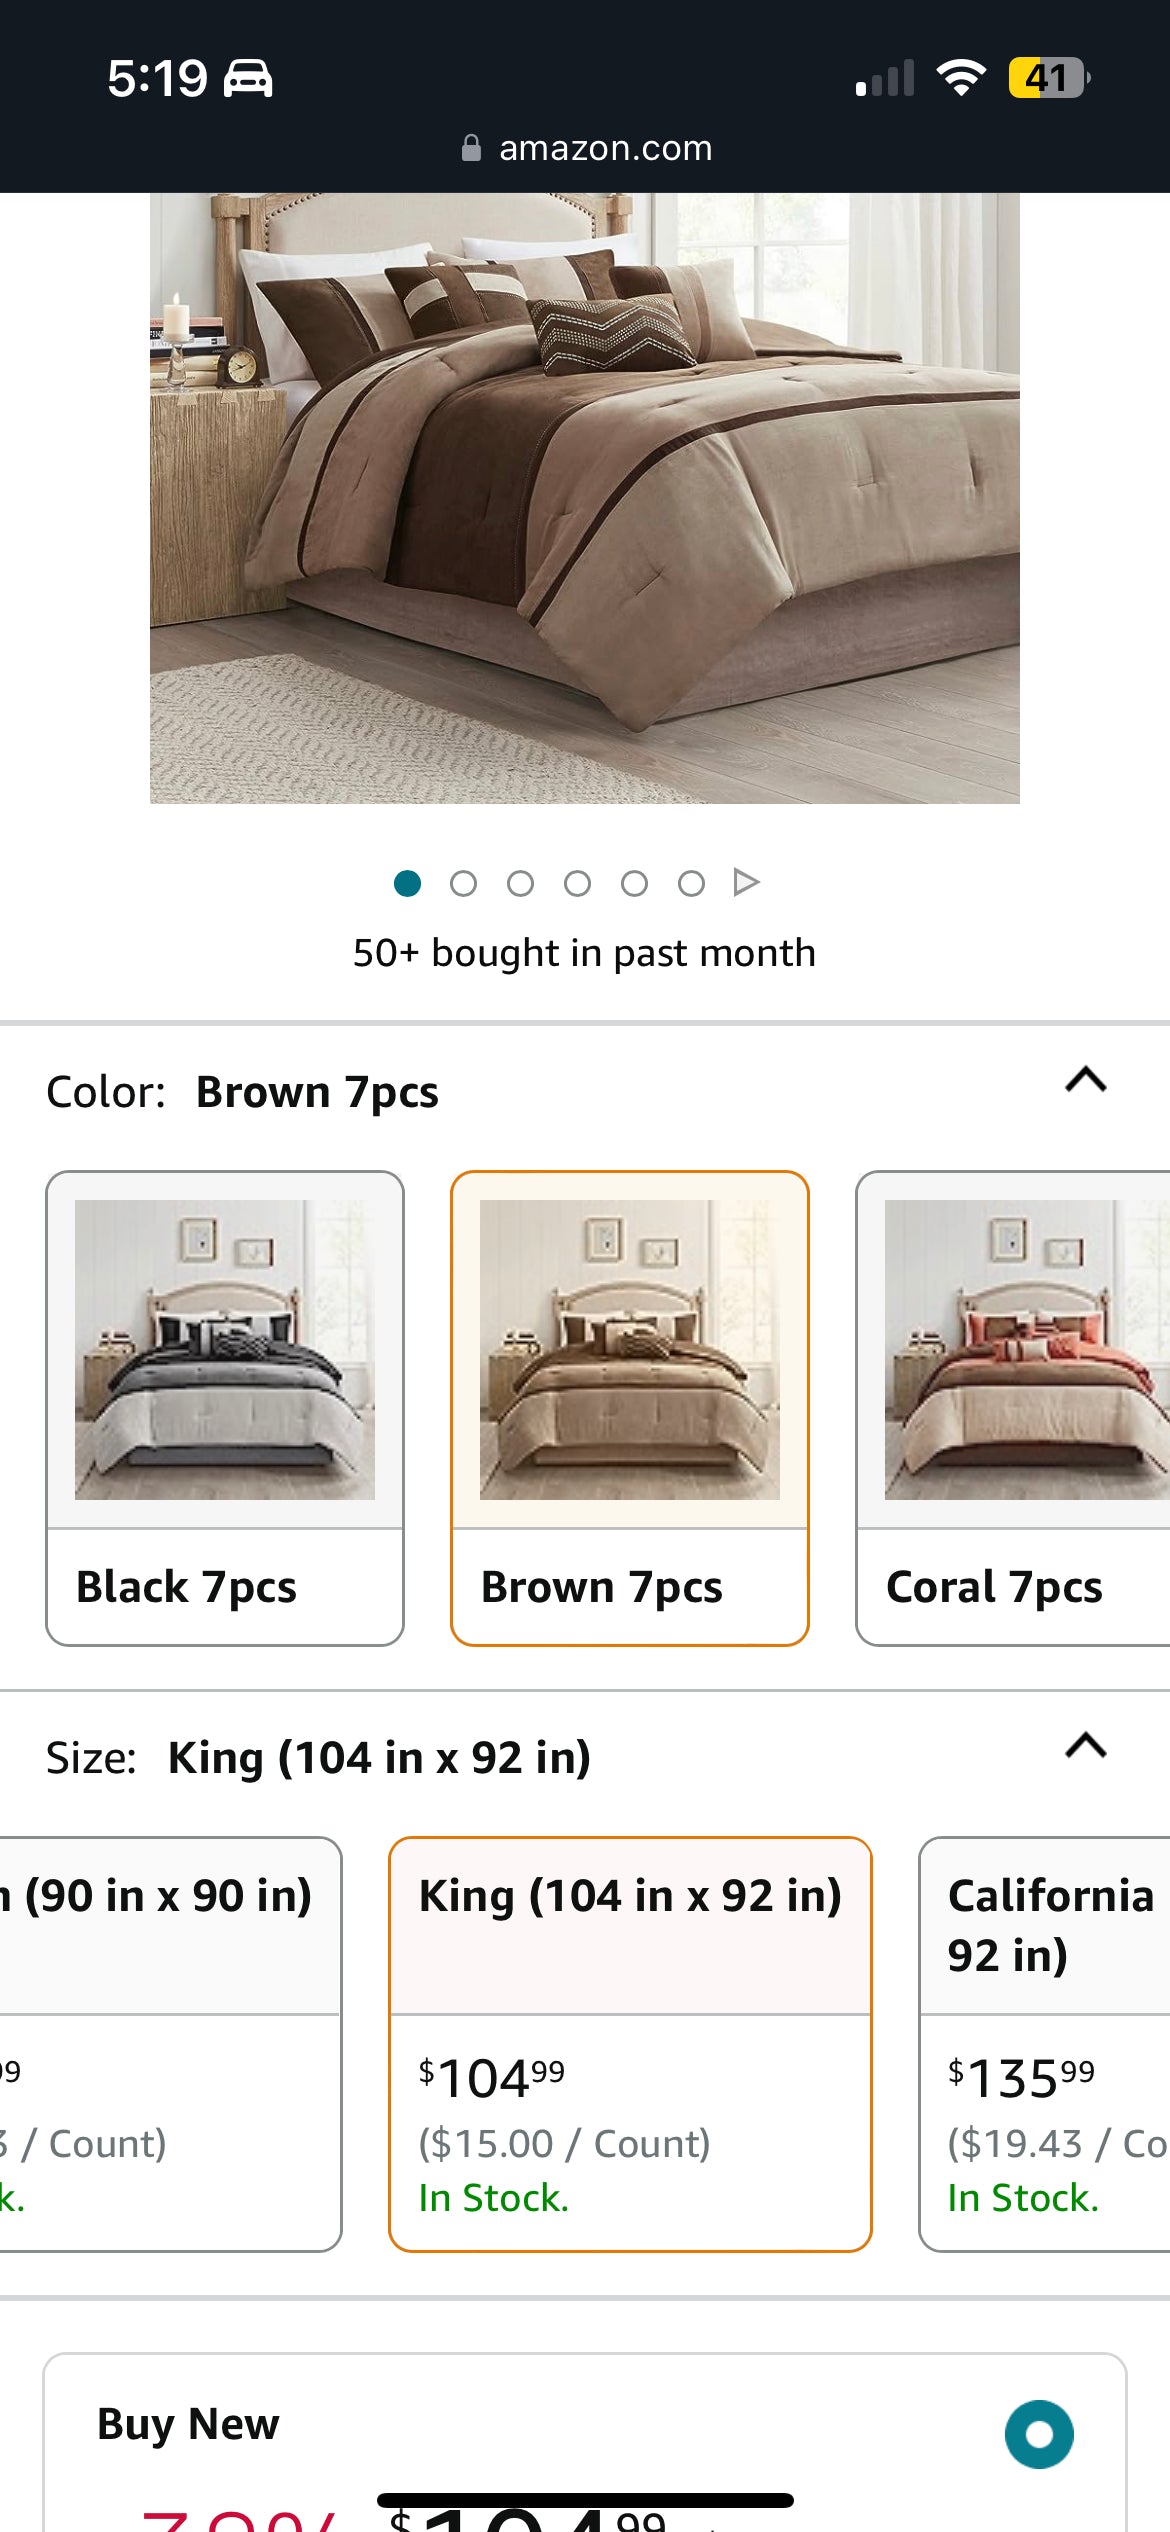 Madison Park Palisades Comforter Set Modern Faux Suede Pieced Stripe Design, All Season Down Alternative Cozy Bedding with Matching Shams, Decorative Pillows, Cal King(104"x92"), Brown 3 piece